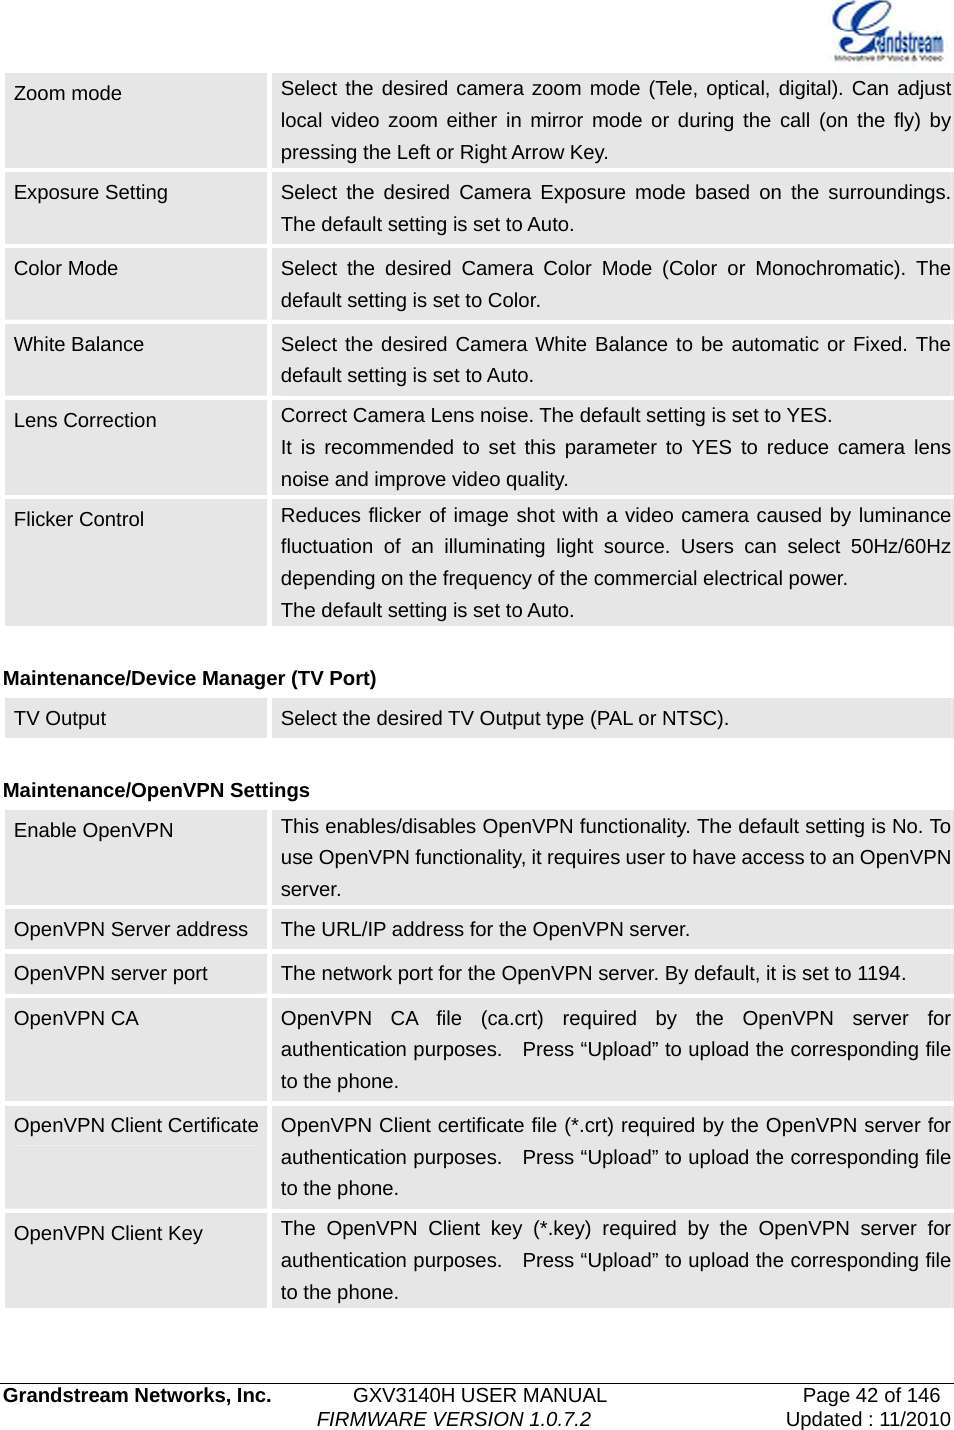   Grandstream Networks, Inc.        GXV3140H USER MANUAL                  Page 42 of 146                                FIRMWARE VERSION 1.0.7.2 Updated : 11/2010  Zoom mode  Select the desired camera zoom mode (Tele, optical, digital). Can adjust local video zoom either in mirror mode or during the call (on the fly) by pressing the Left or Right Arrow Key. Exposure Setting  Select the desired Camera Exposure mode based on the surroundings. The default setting is set to Auto. Color Mode  Select the desired Camera Color Mode (Color or Monochromatic). The default setting is set to Color. White Balance  Select the desired Camera White Balance to be automatic or Fixed. The default setting is set to Auto. Lens Correction  Correct Camera Lens noise. The default setting is set to YES. It is recommended to set this parameter to YES to reduce camera lens noise and improve video quality. Flicker Control    Reduces flicker of image shot with a video camera caused by luminance fluctuation of an illuminating light source. Users can select 50Hz/60Hz depending on the frequency of the commercial electrical power. The default setting is set to Auto.    Maintenance/Device Manager (TV Port) TV Output  Select the desired TV Output type (PAL or NTSC).  Maintenance/OpenVPN Settings Enable OpenVPN  This enables/disables OpenVPN functionality. The default setting is No. To use OpenVPN functionality, it requires user to have access to an OpenVPN server. OpenVPN Server address    The URL/IP address for the OpenVPN server.   OpenVPN server port    The network port for the OpenVPN server. By default, it is set to 1194.   OpenVPN CA  OpenVPN CA file (ca.crt) required by the OpenVPN server for authentication purposes.    Press “Upload” to upload the corresponding file to the phone. OpenVPN Client Certificate  OpenVPN Client certificate file (*.crt) required by the OpenVPN server for authentication purposes.    Press “Upload” to upload the corresponding file to the phone.   OpenVPN Client Key  The OpenVPN Client key (*.key) required by the OpenVPN server for authentication purposes.    Press “Upload” to upload the corresponding file to the phone.  